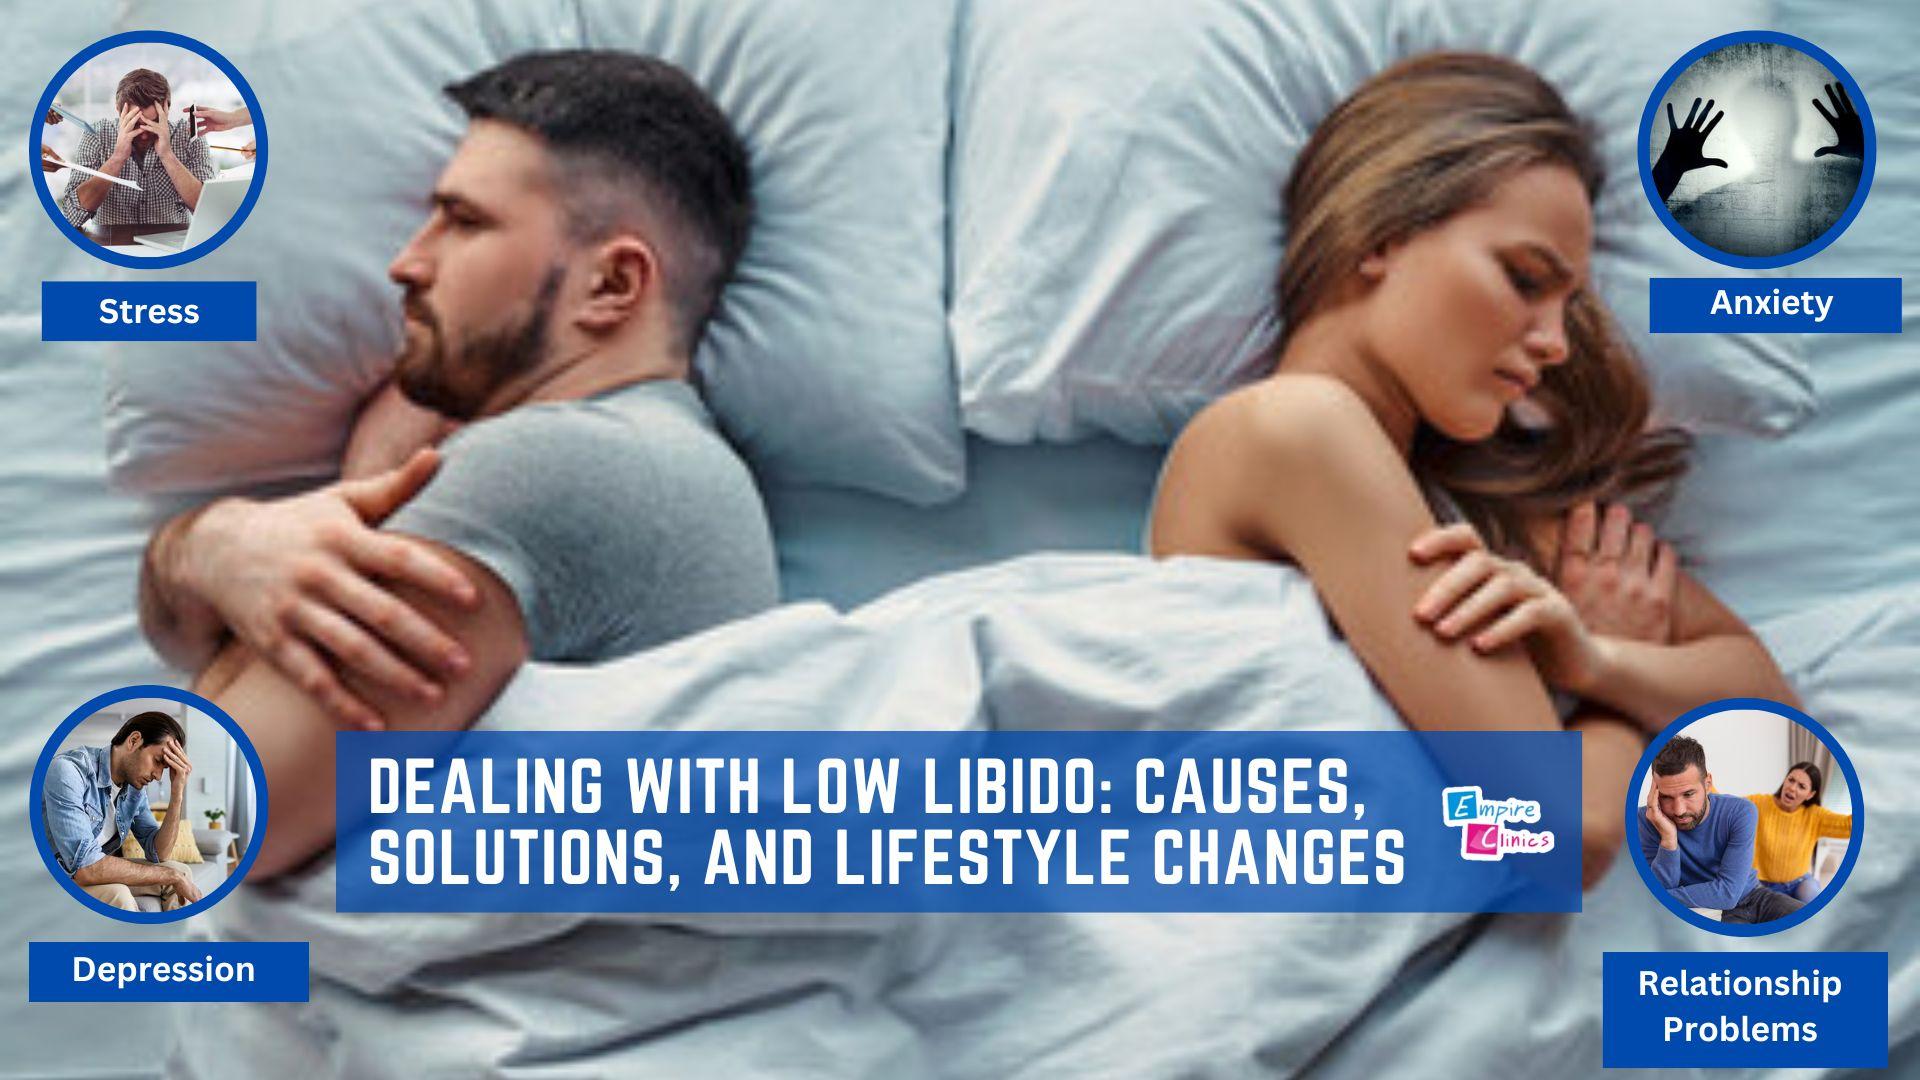 Dealing with Low Libido: Causes, Solutions, and Lifestyle Changes